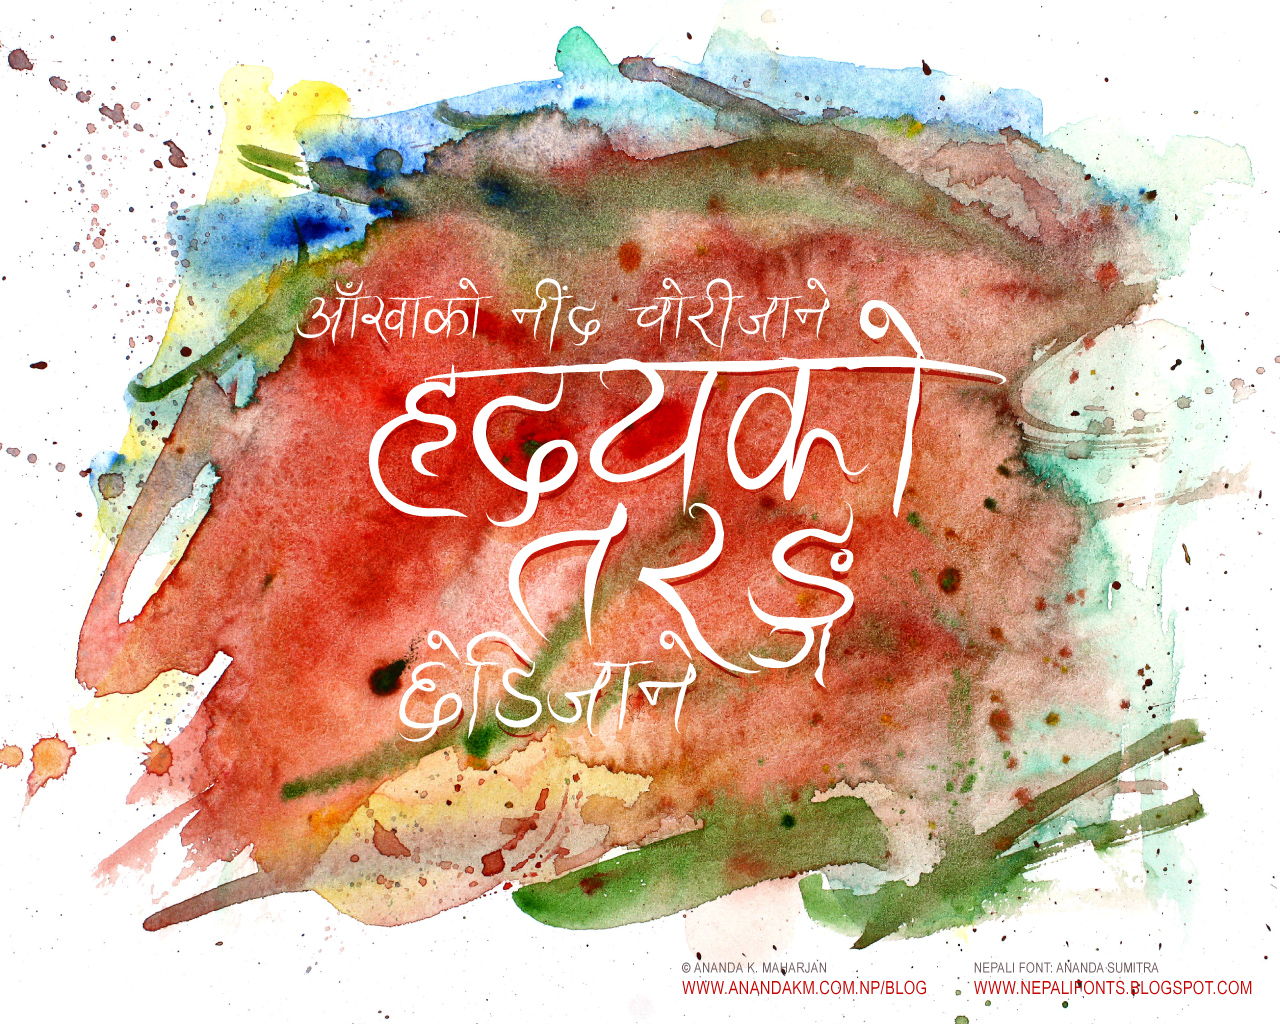 New Nepali Fonts: Watercolor wallpapers with 